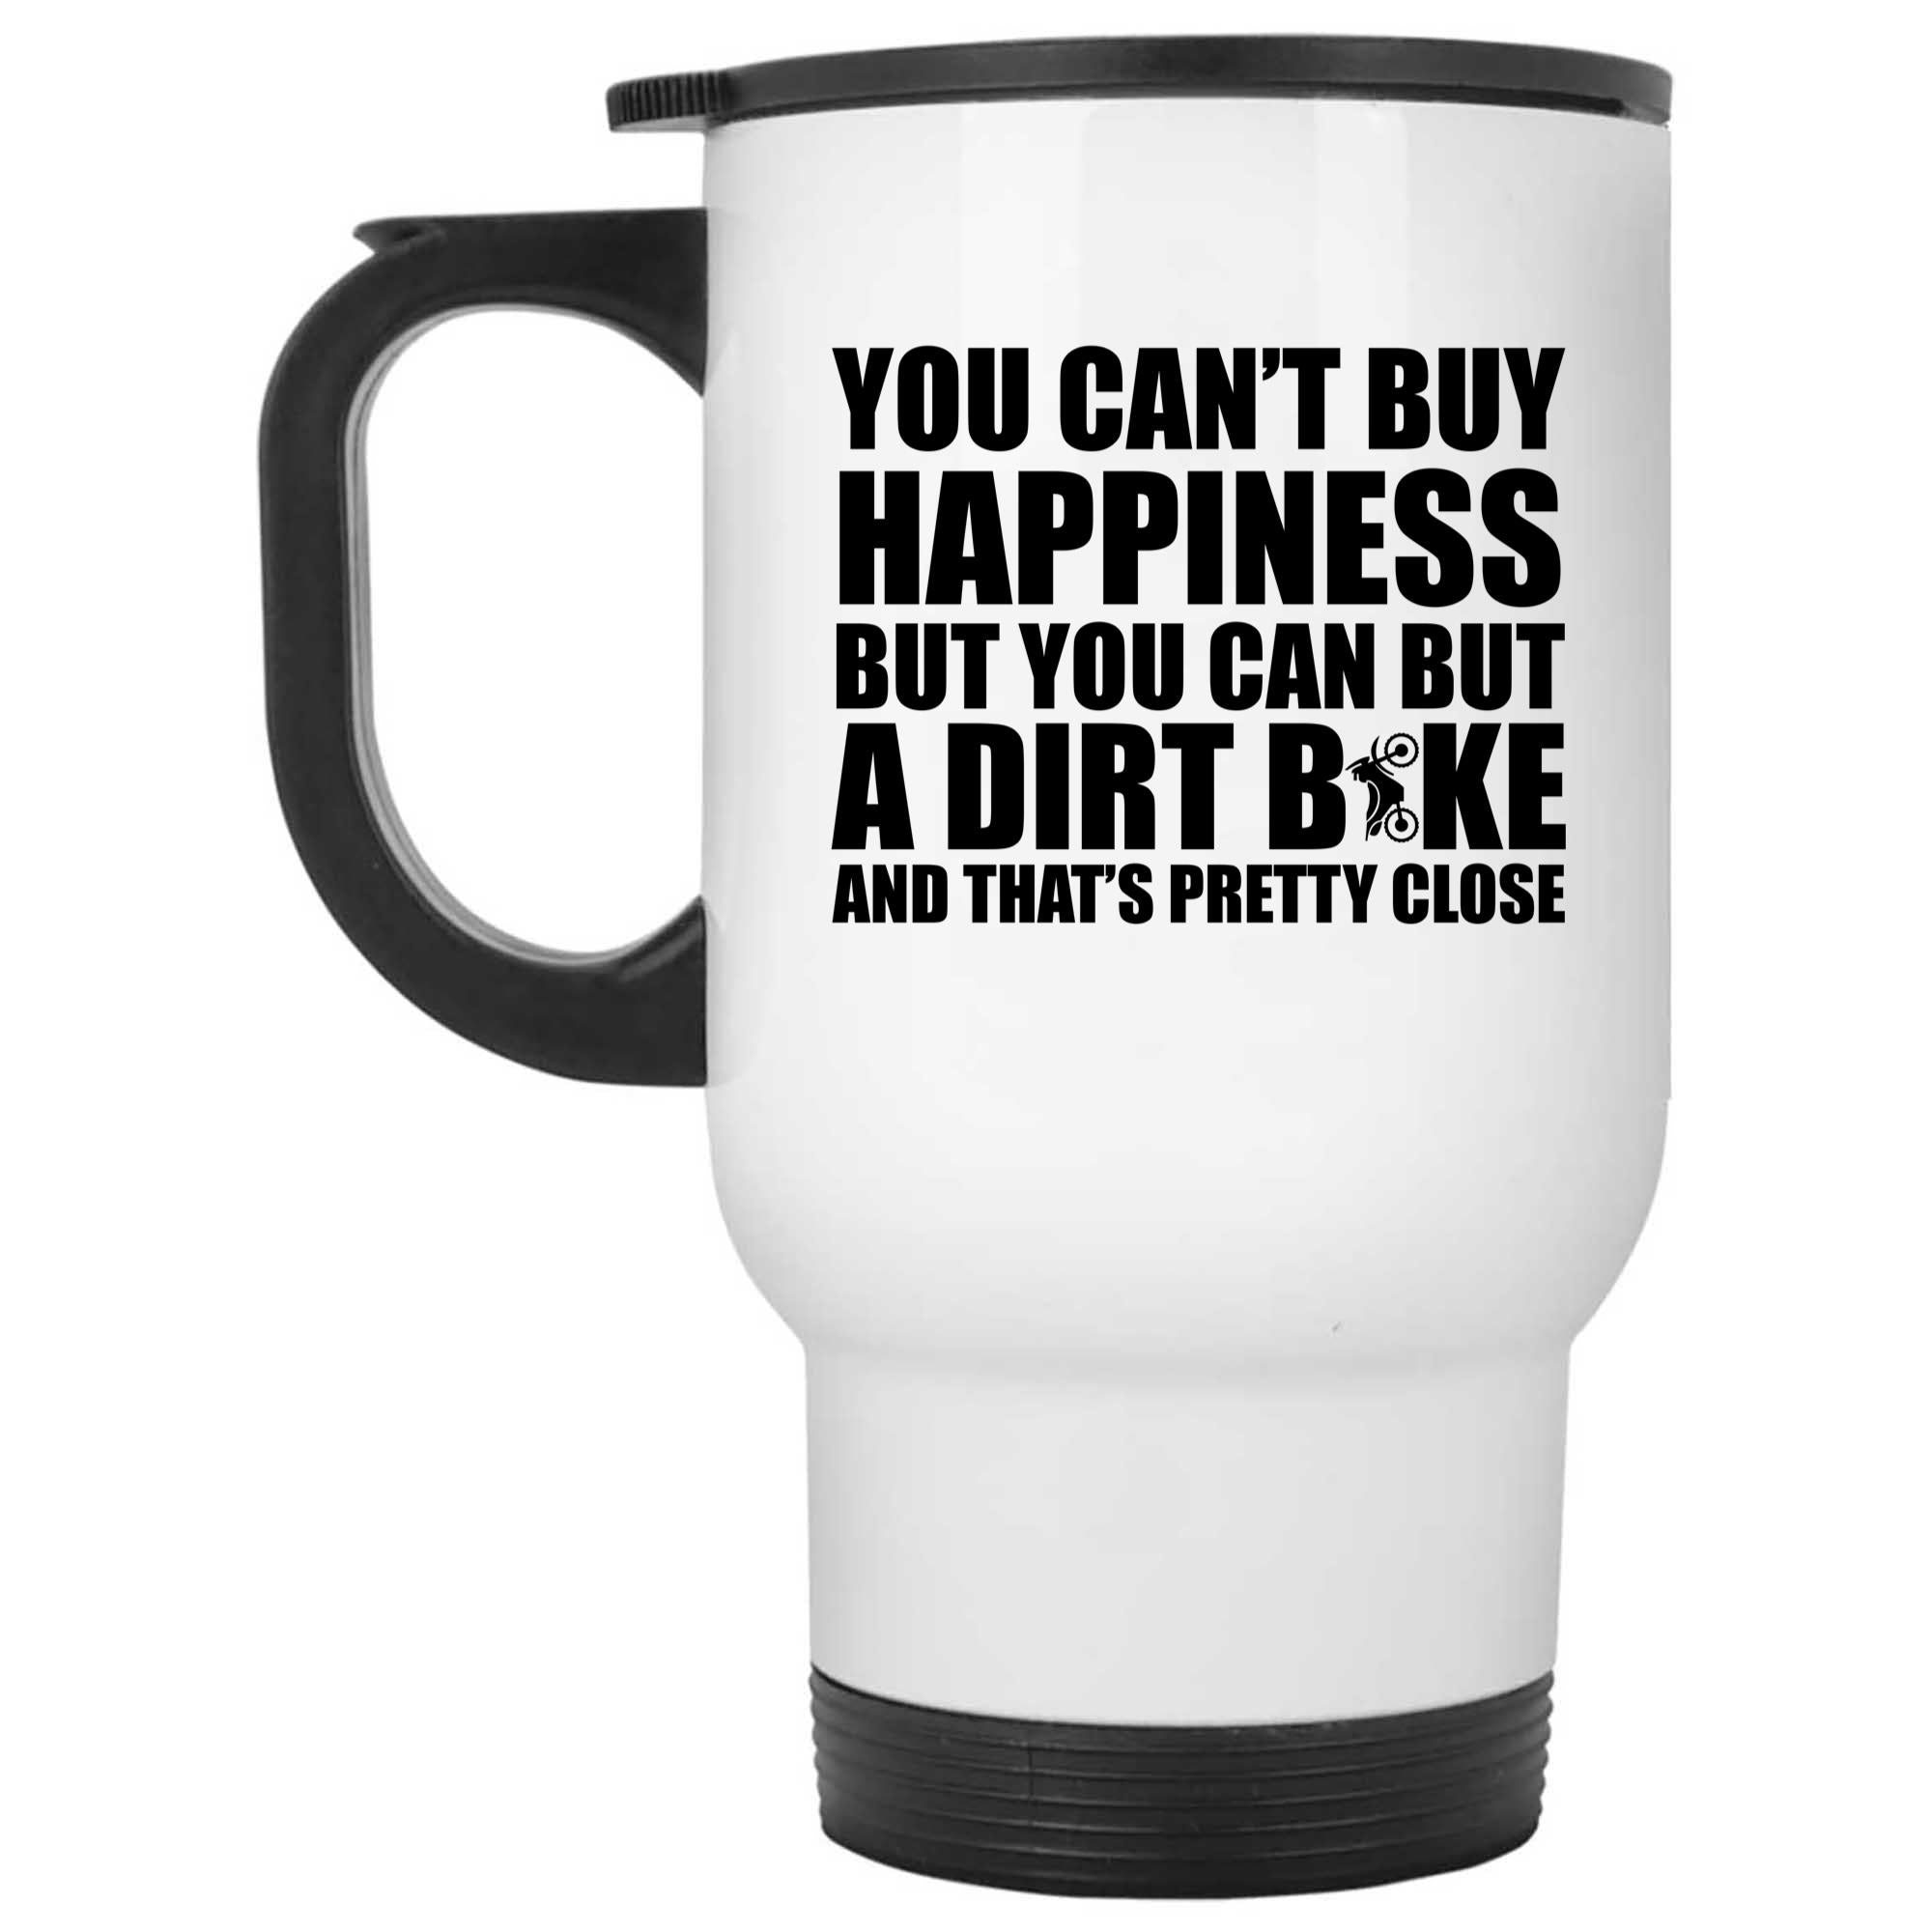 Skitongifts Funny Ceramic Novelty Coffee Mug Dirtbike Happy Great For Any Motorcycle Fan Lover uSTZyDt